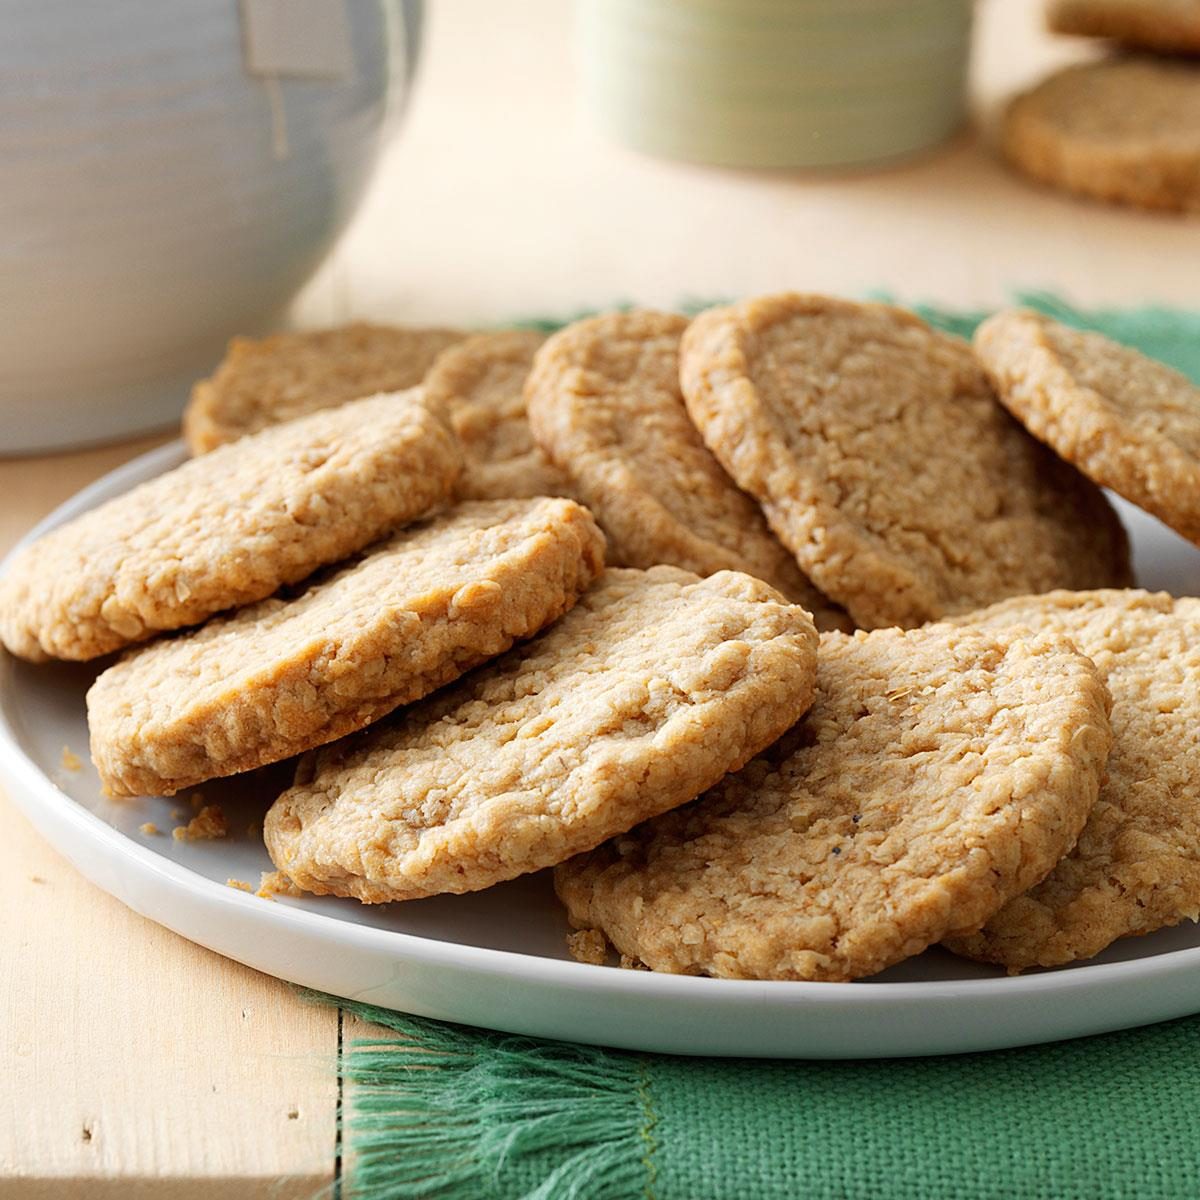 30 Oatmeal Cookie Recipes to Add to Your Collection | Taste of Home